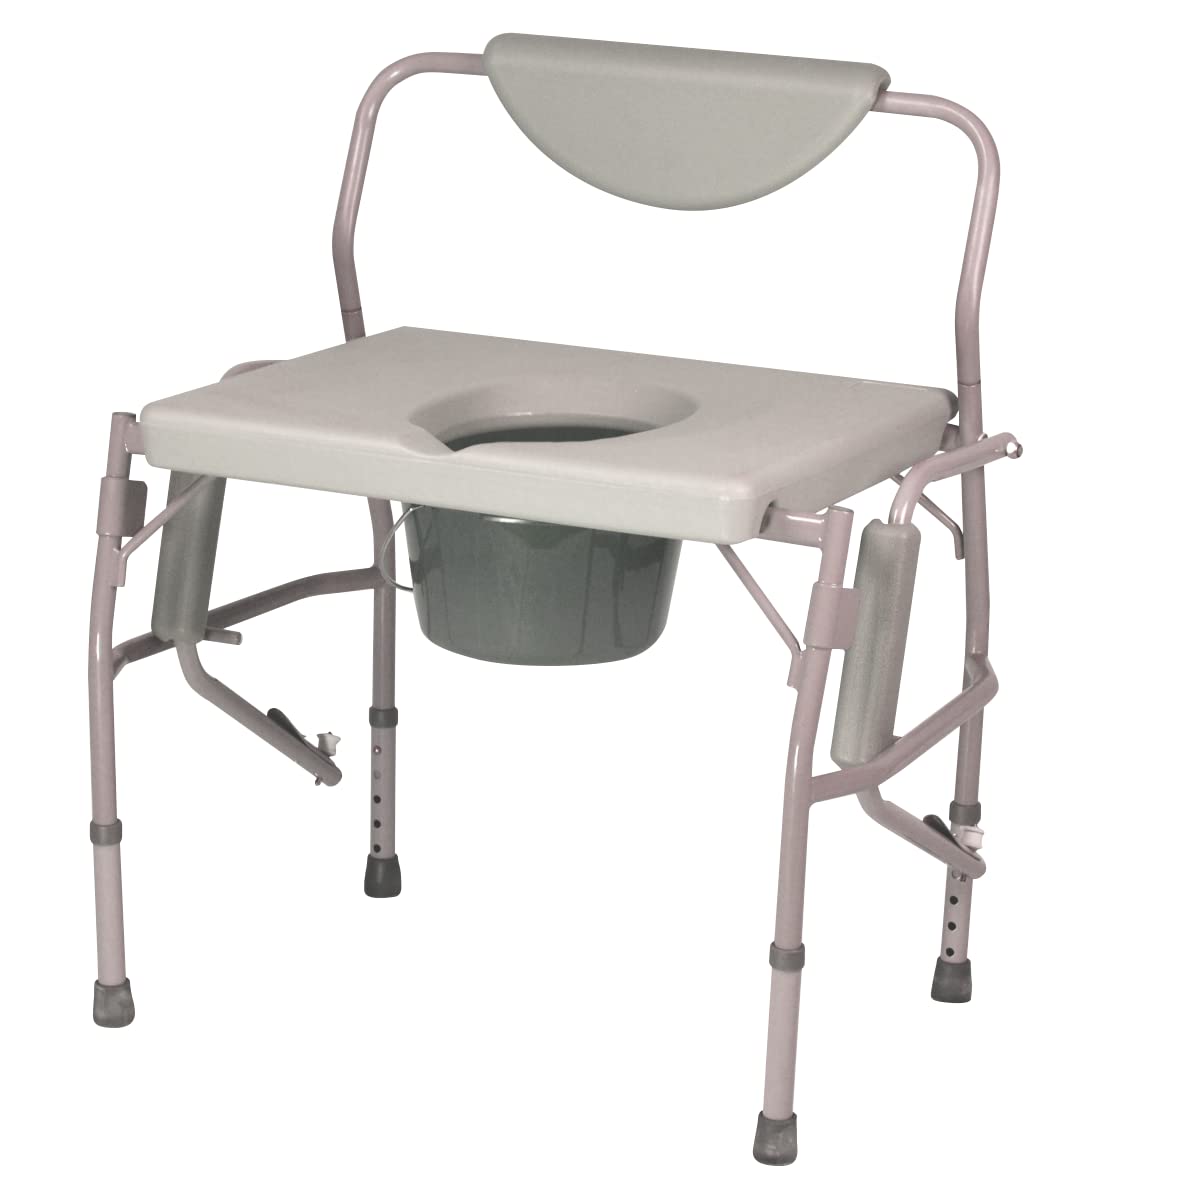 Homecraft Deluxe Bariatric Drop Arm Commode, 1000 Pound Weight Capacity, Adjustable Height Bedside or Over-the-Toilet Commode, Designed for Patients Who Struggle with Obesity, Easy-to-Assemble